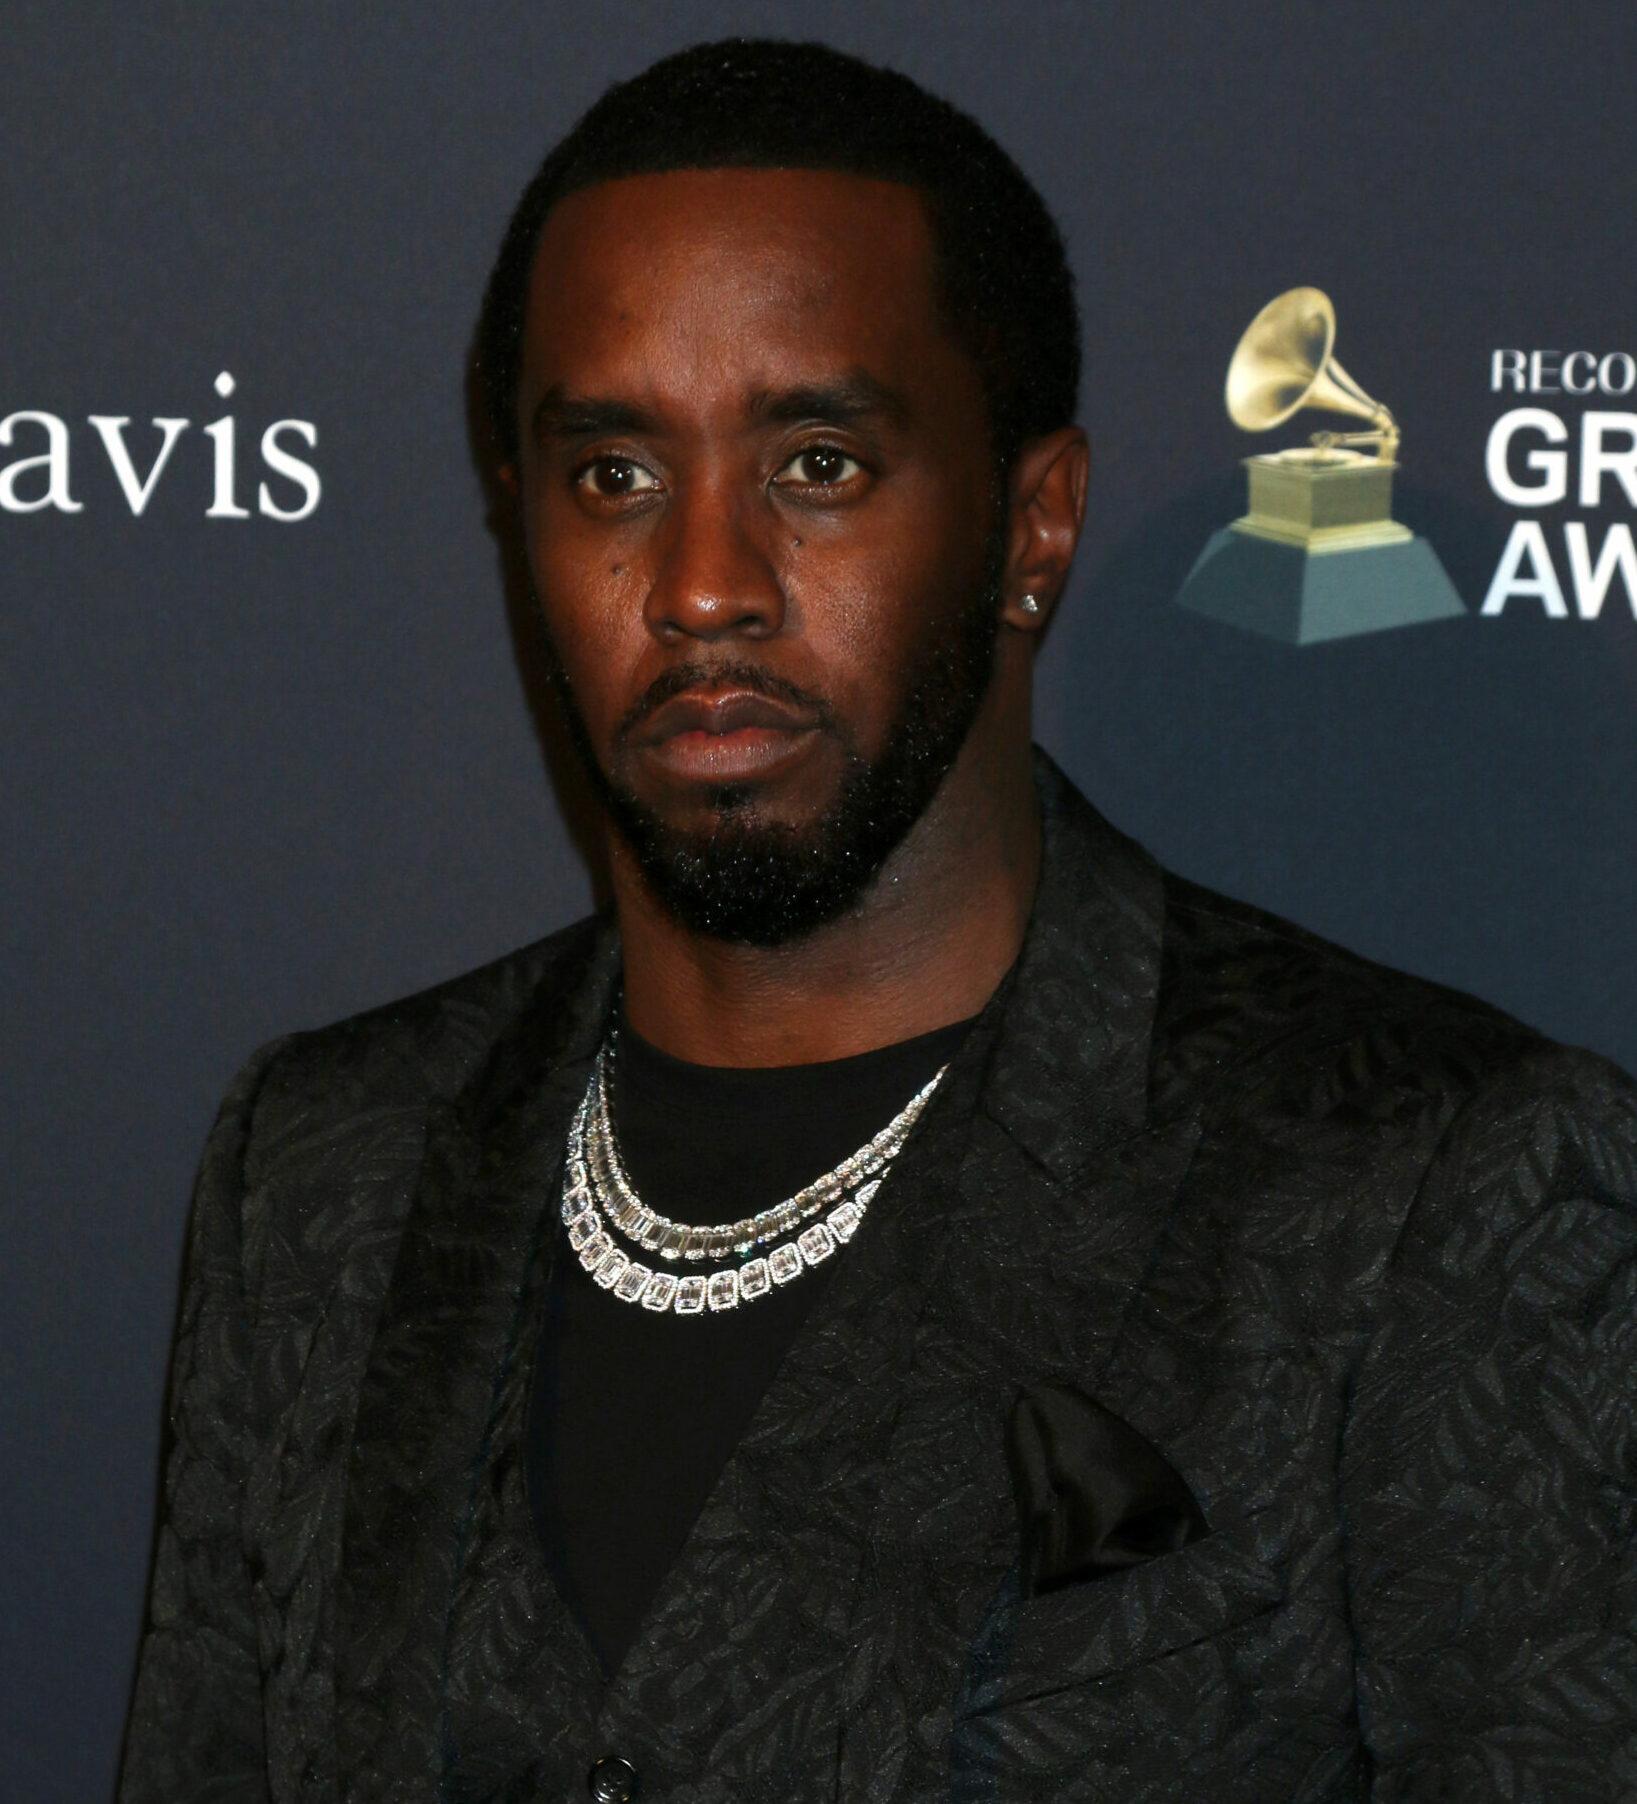 Sean Combs at the 2020 Clive Davis Pre-Grammy Party at the Beverly Hilton Hotel on January 25, 2020 in Beverly Hills